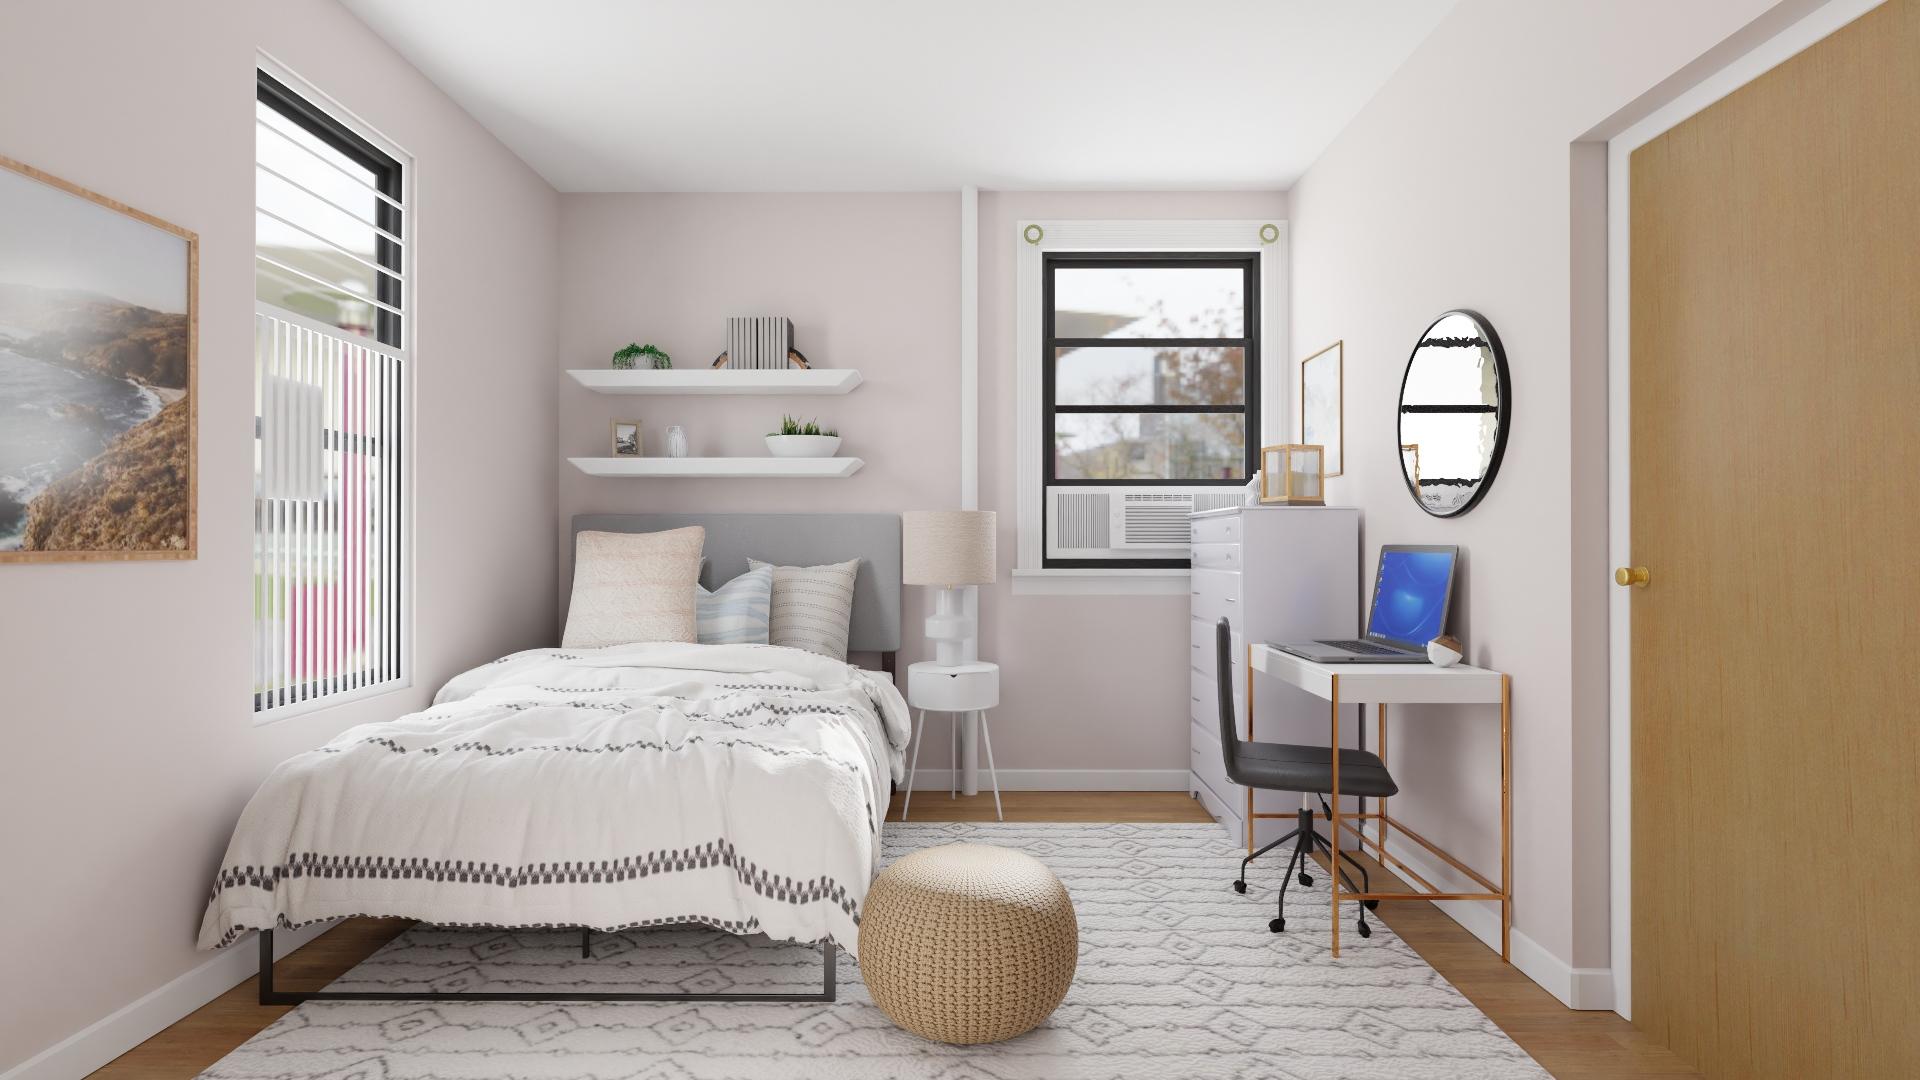 Traditional Mid-Century and Pastel Colors Maximize This Small Bedroom